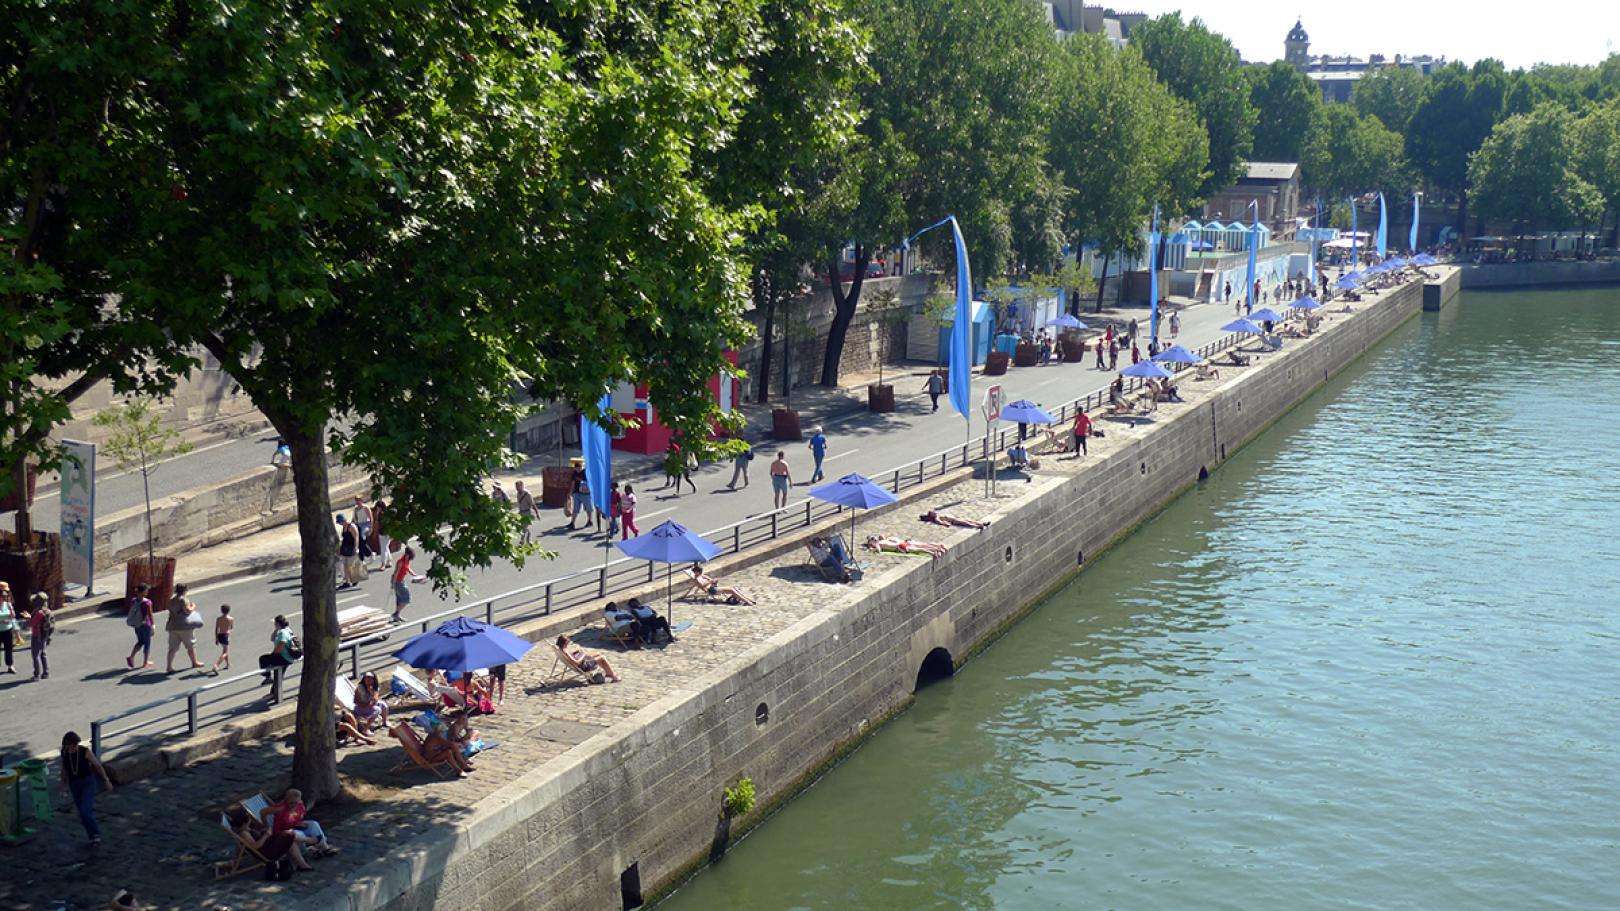 Summer will be hot on the beaches of Paris